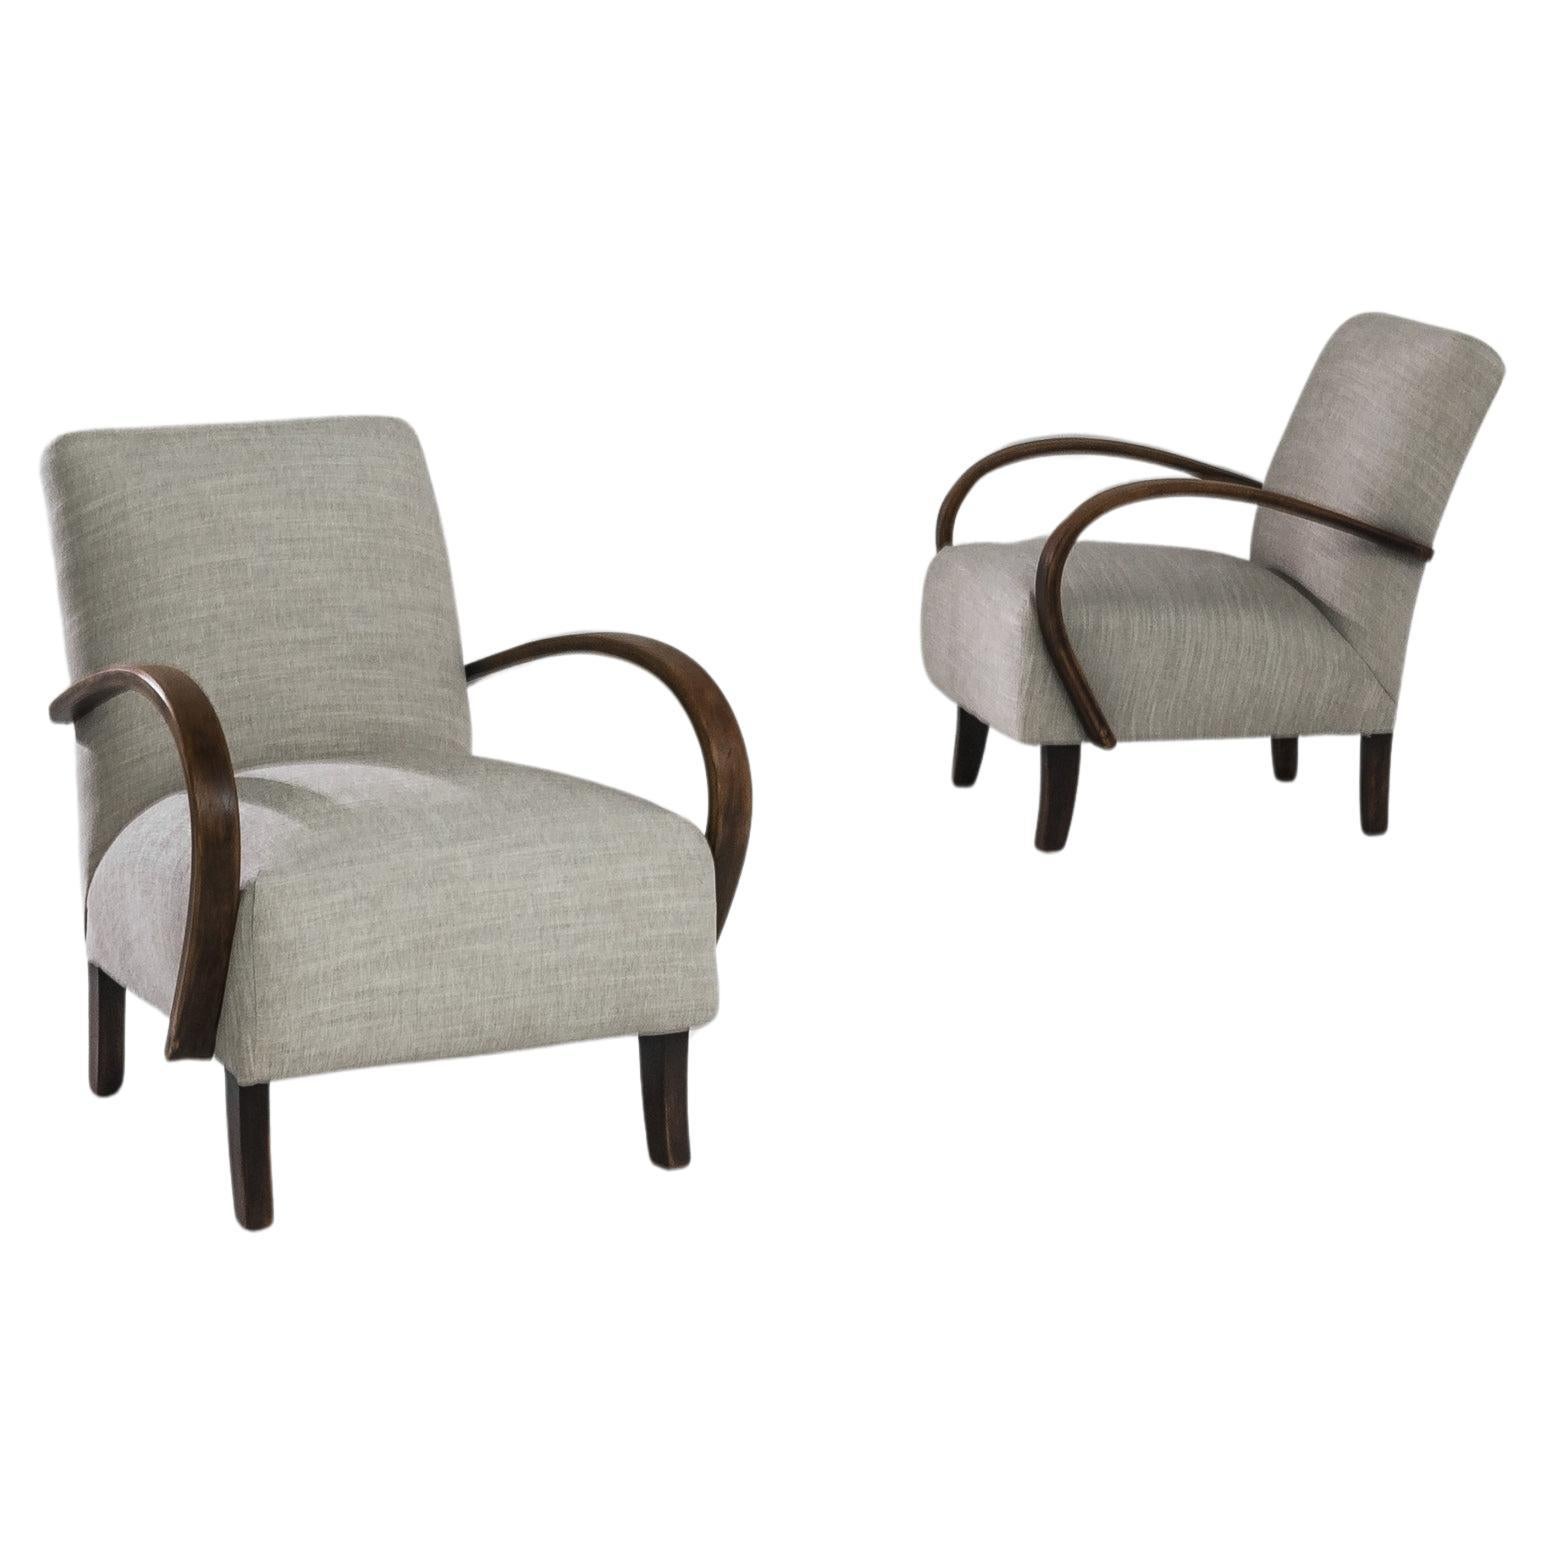 1950s, Upholstered Armchairs by Jindrich Halabala, Pair For Sale